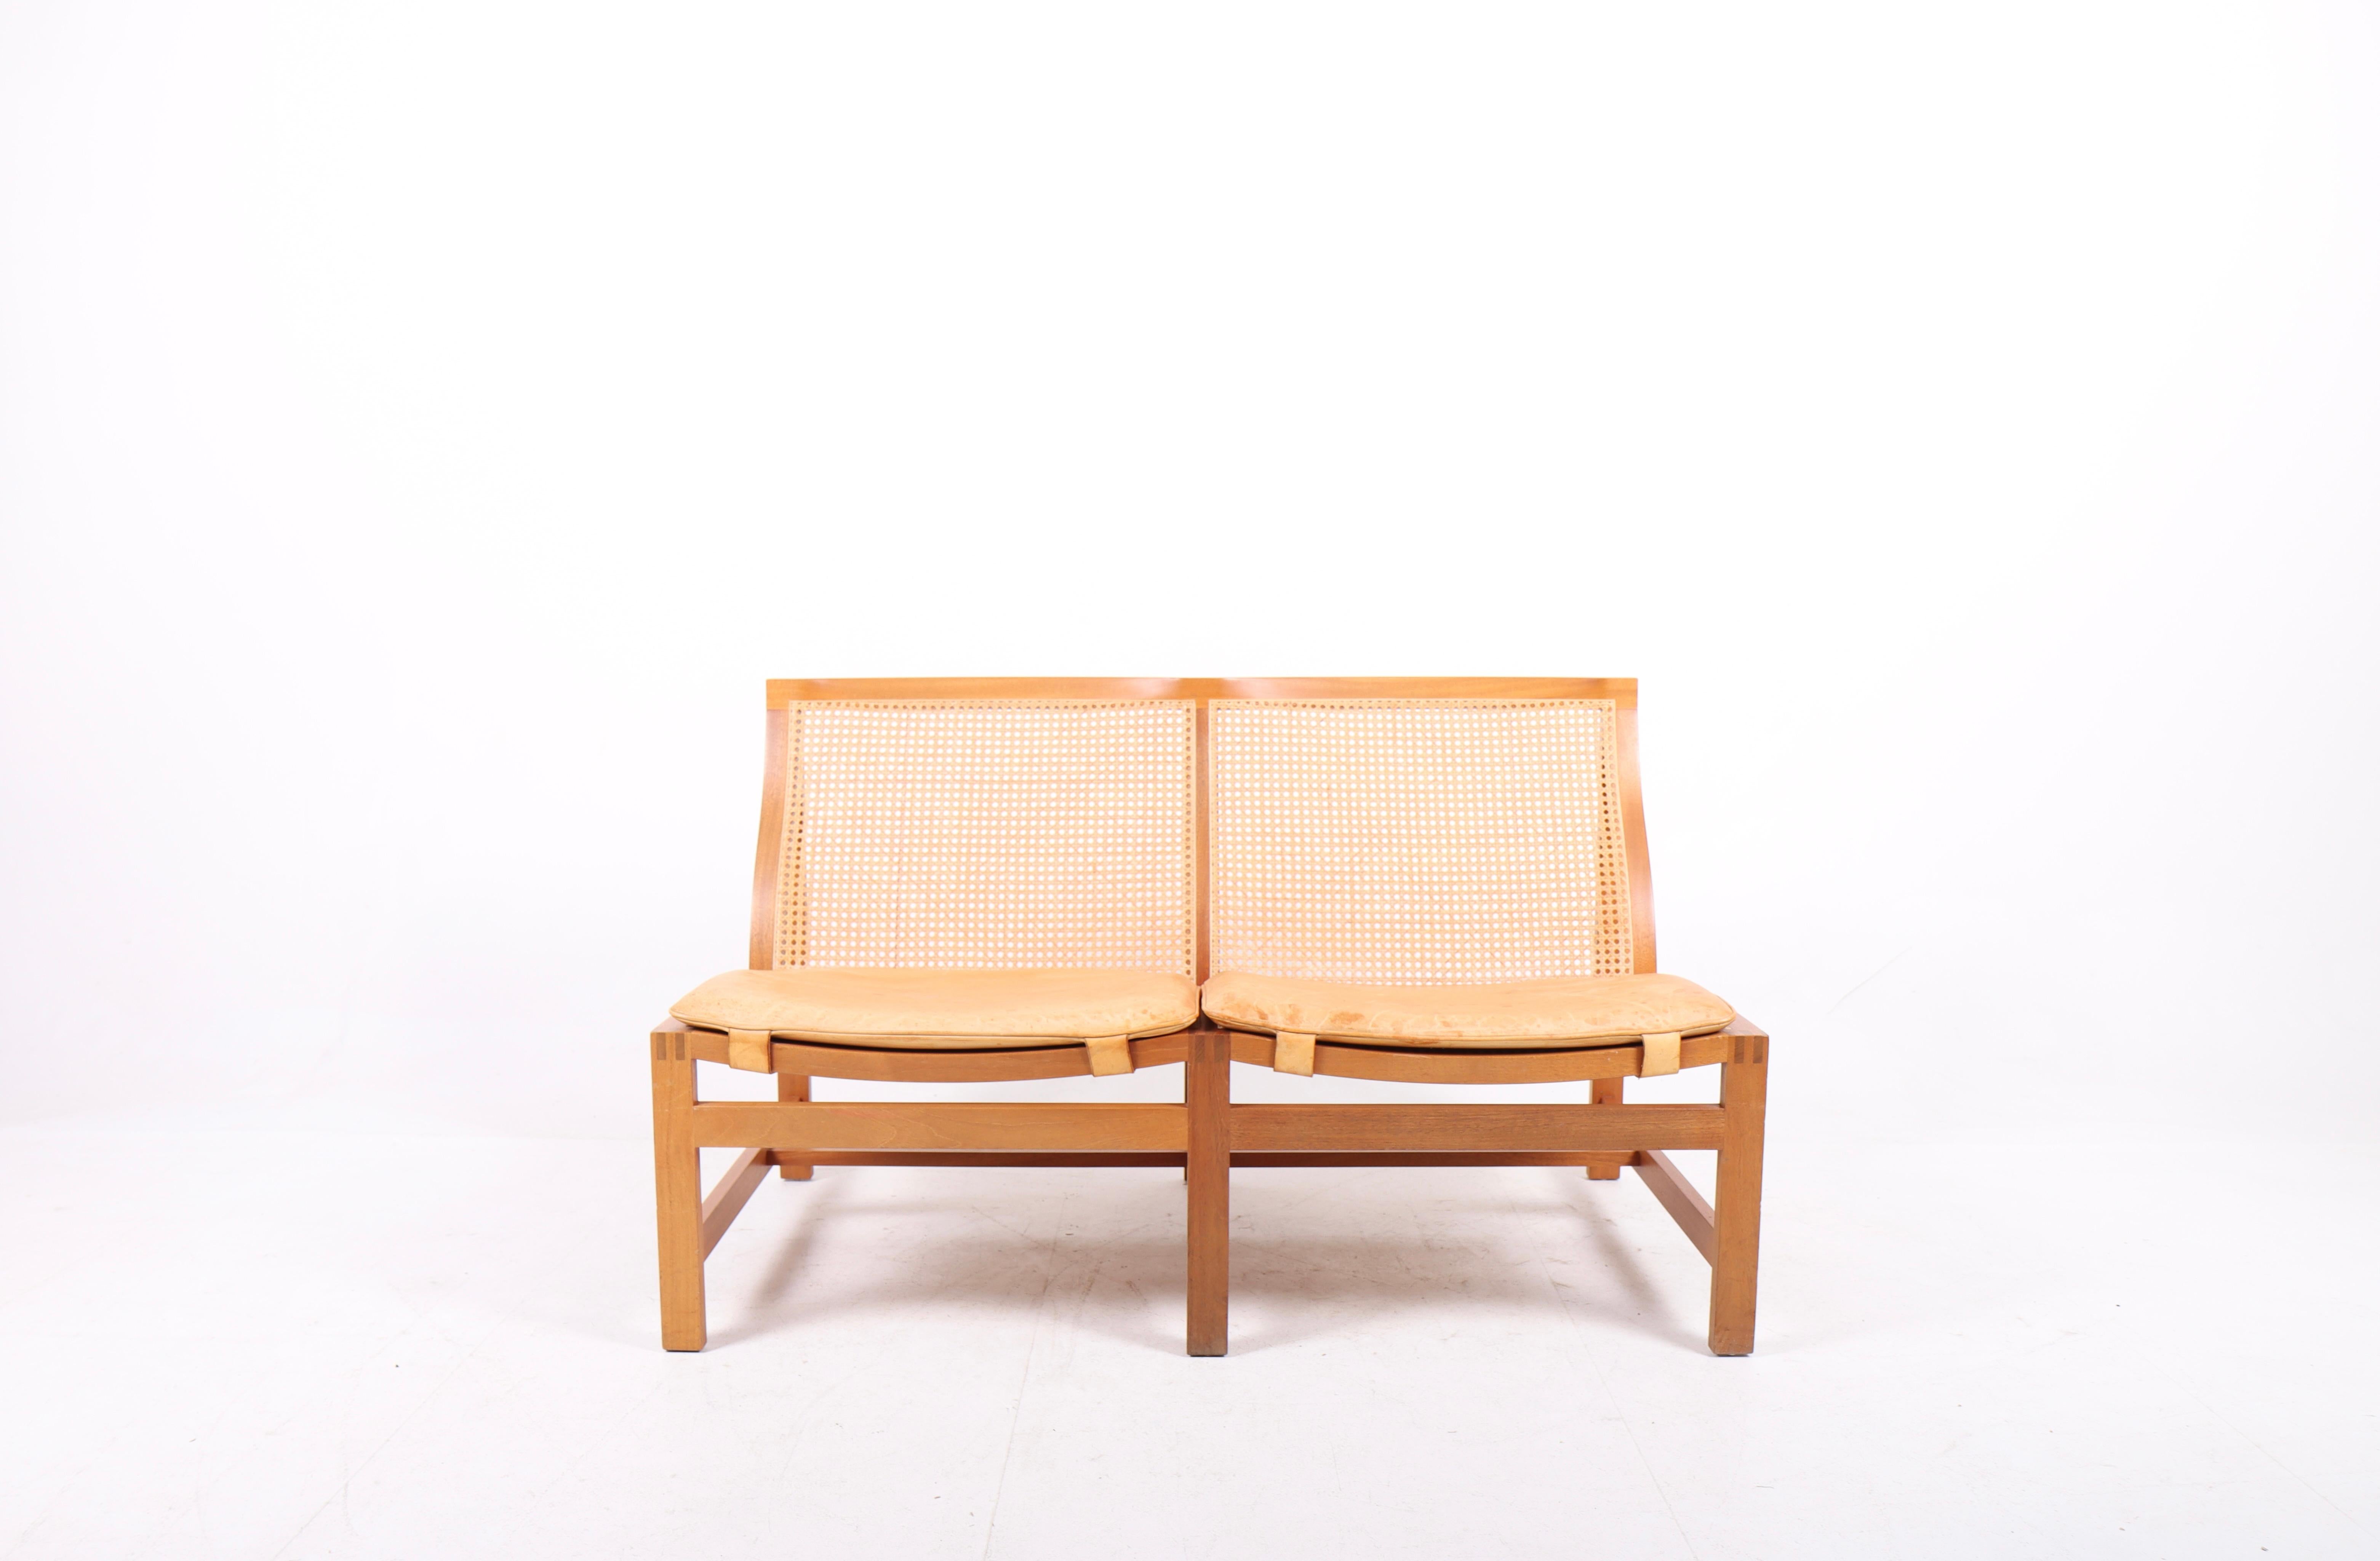 Elegant sofa with mahogany frame and French caning in seat and back. Seat cushion in patinated leather. Designed by Danish architects Johnny Sørensen and Rud Thygesen.